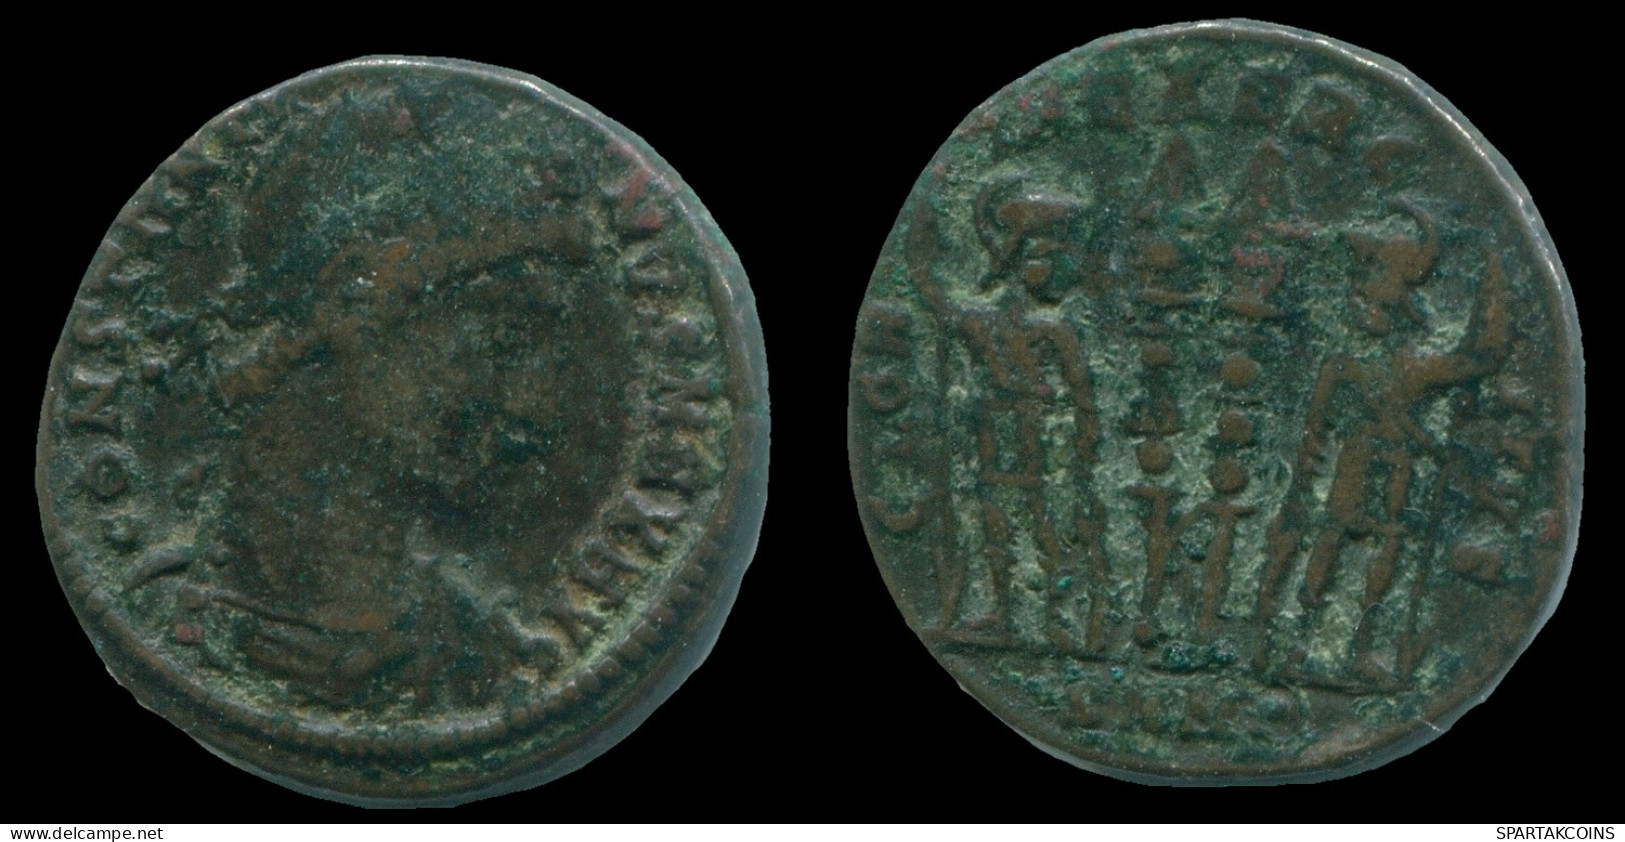 CONSTANTINE I NICOMEDIA Mint ( SMN ) TWO SOLDIERS #ANC13185.18.U.A - The Christian Empire (307 AD To 363 AD)